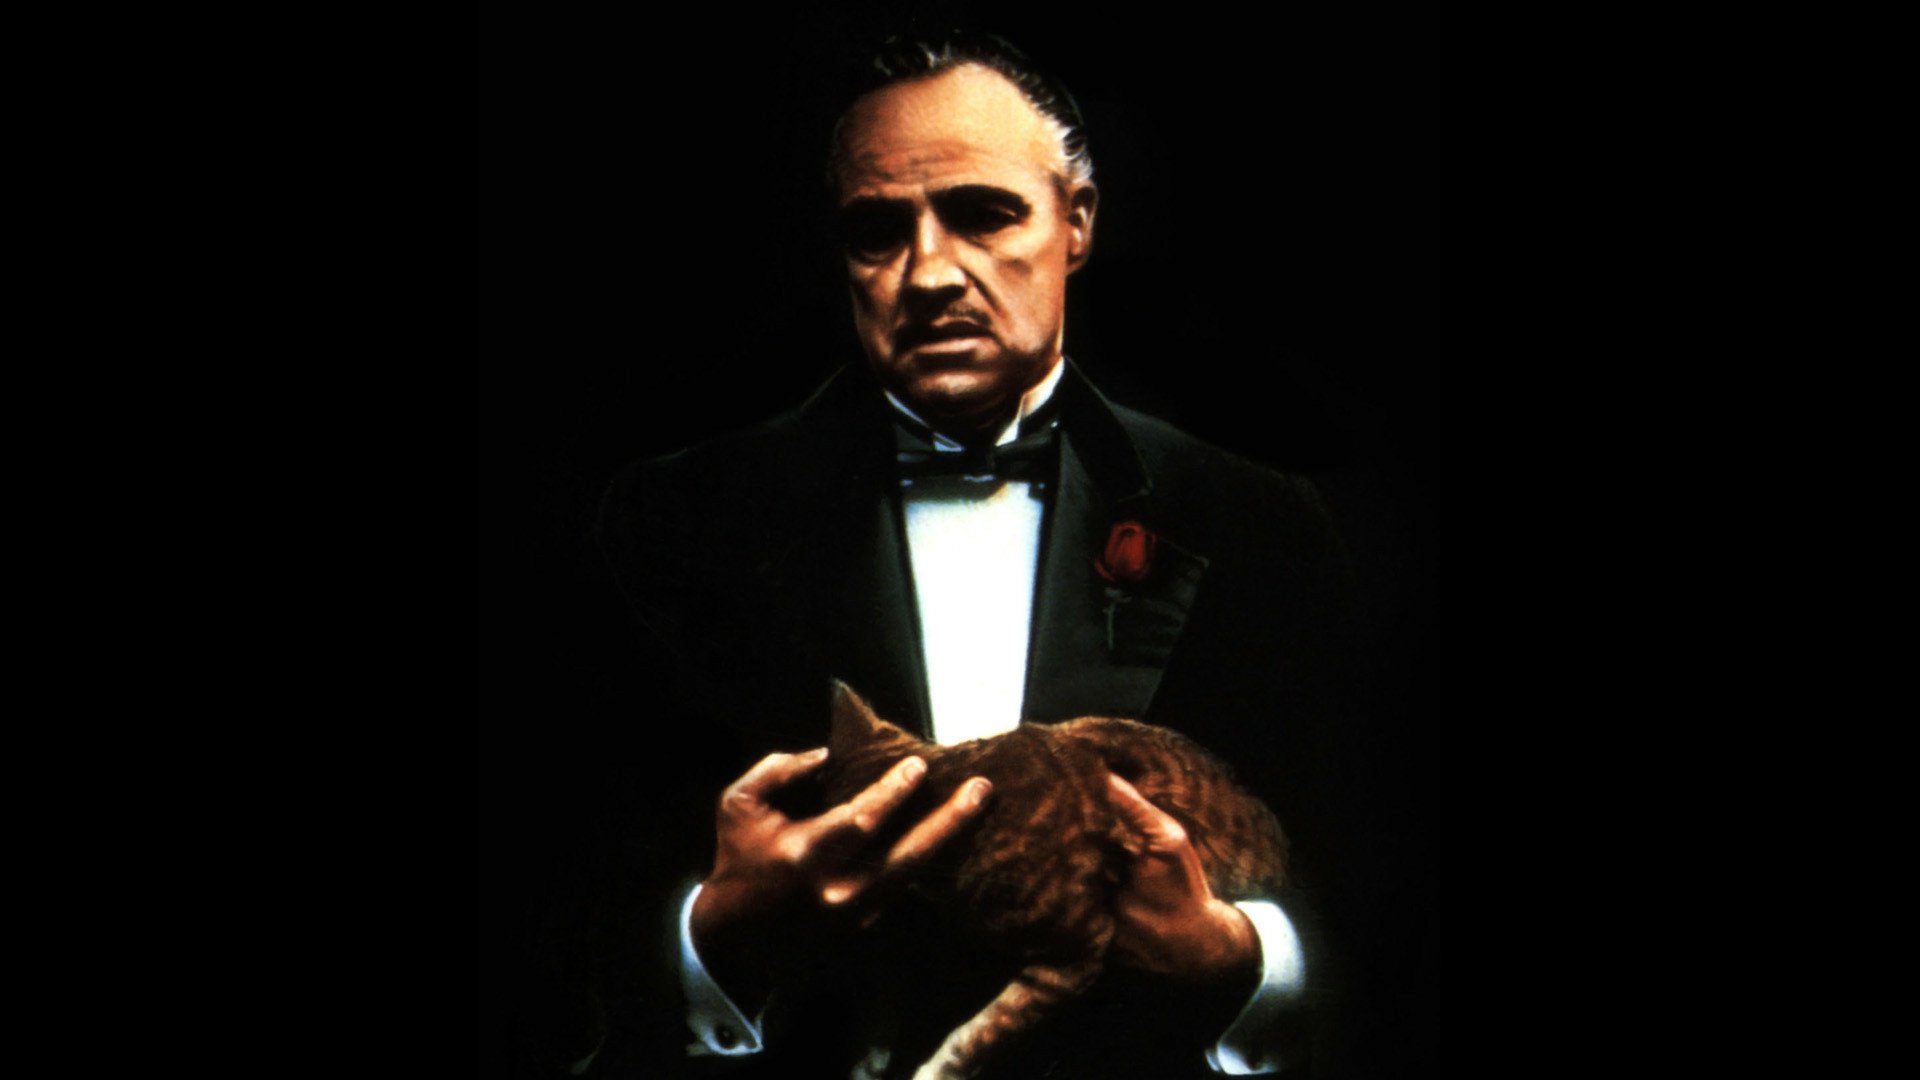 1920x1080 The Godfather Wallpaper Background Image. 